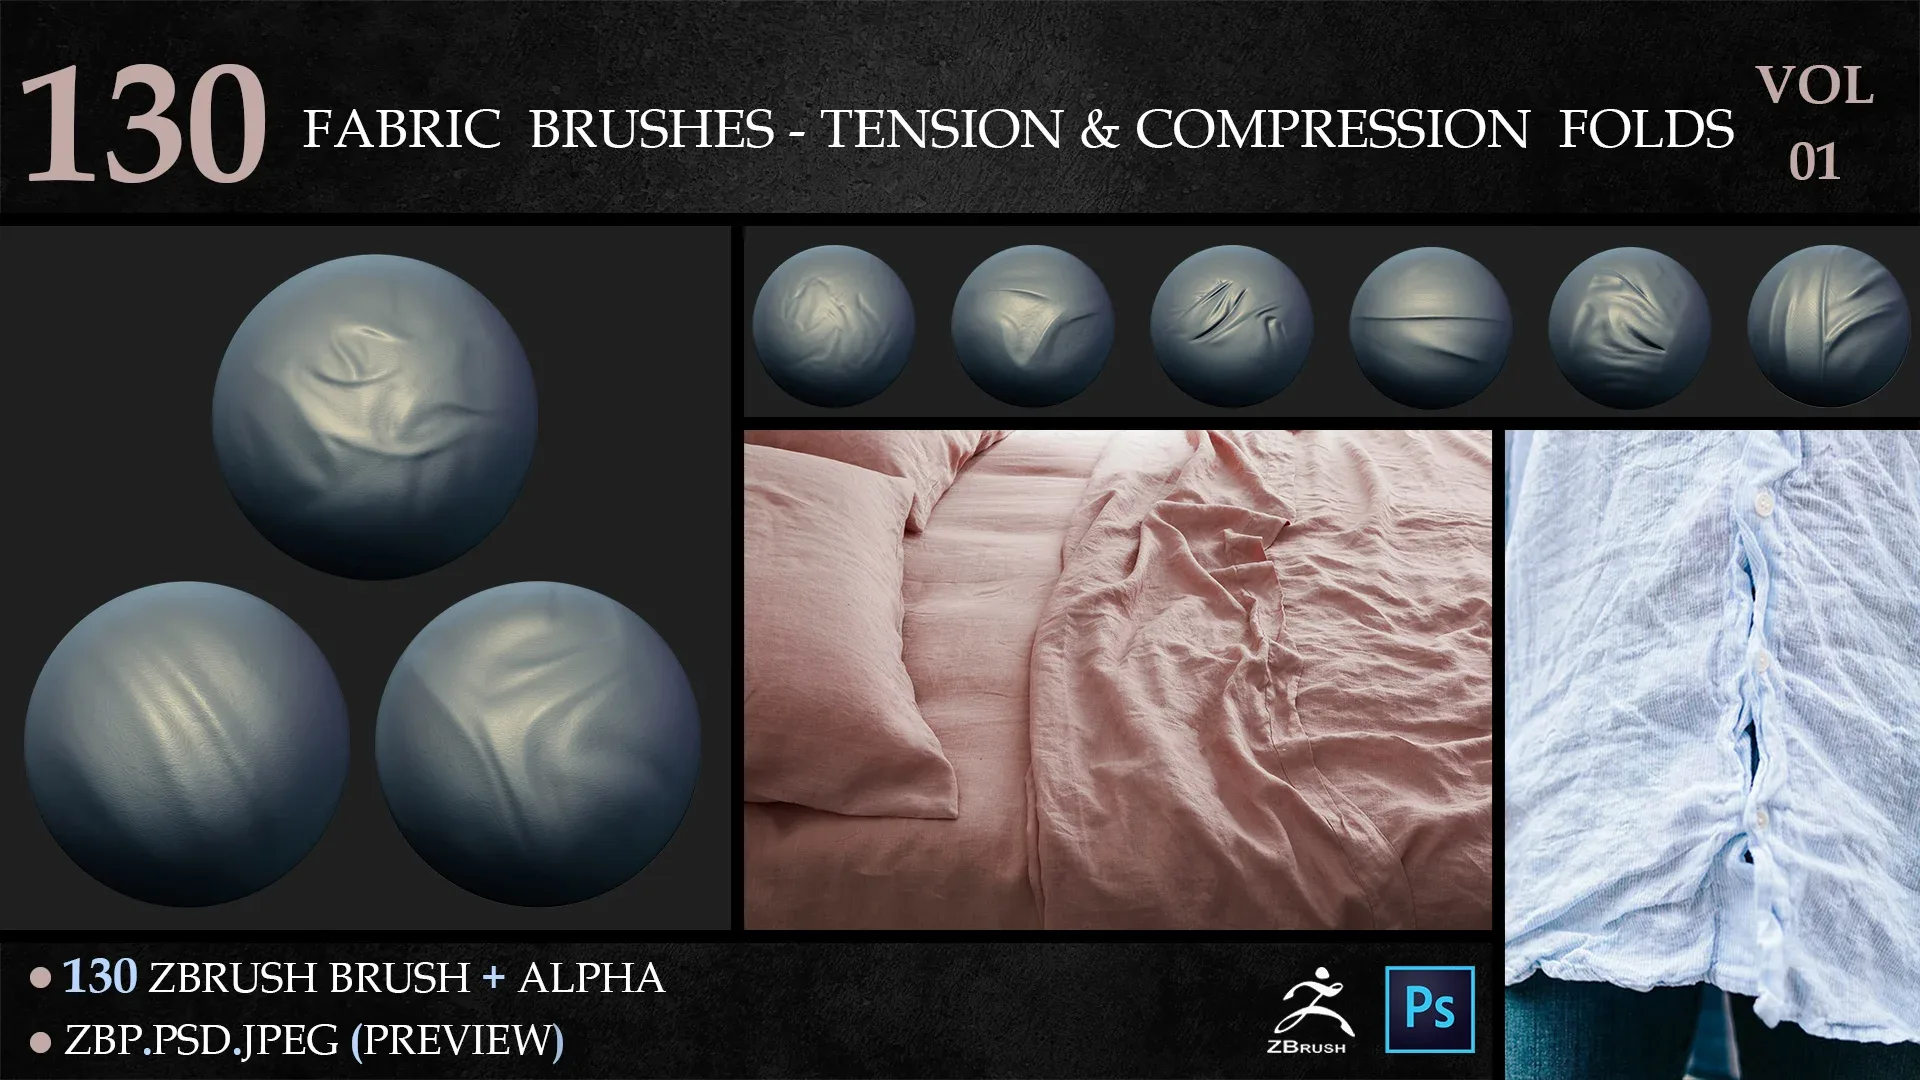 130 Fabric Brushes - Tension & Compression Folds